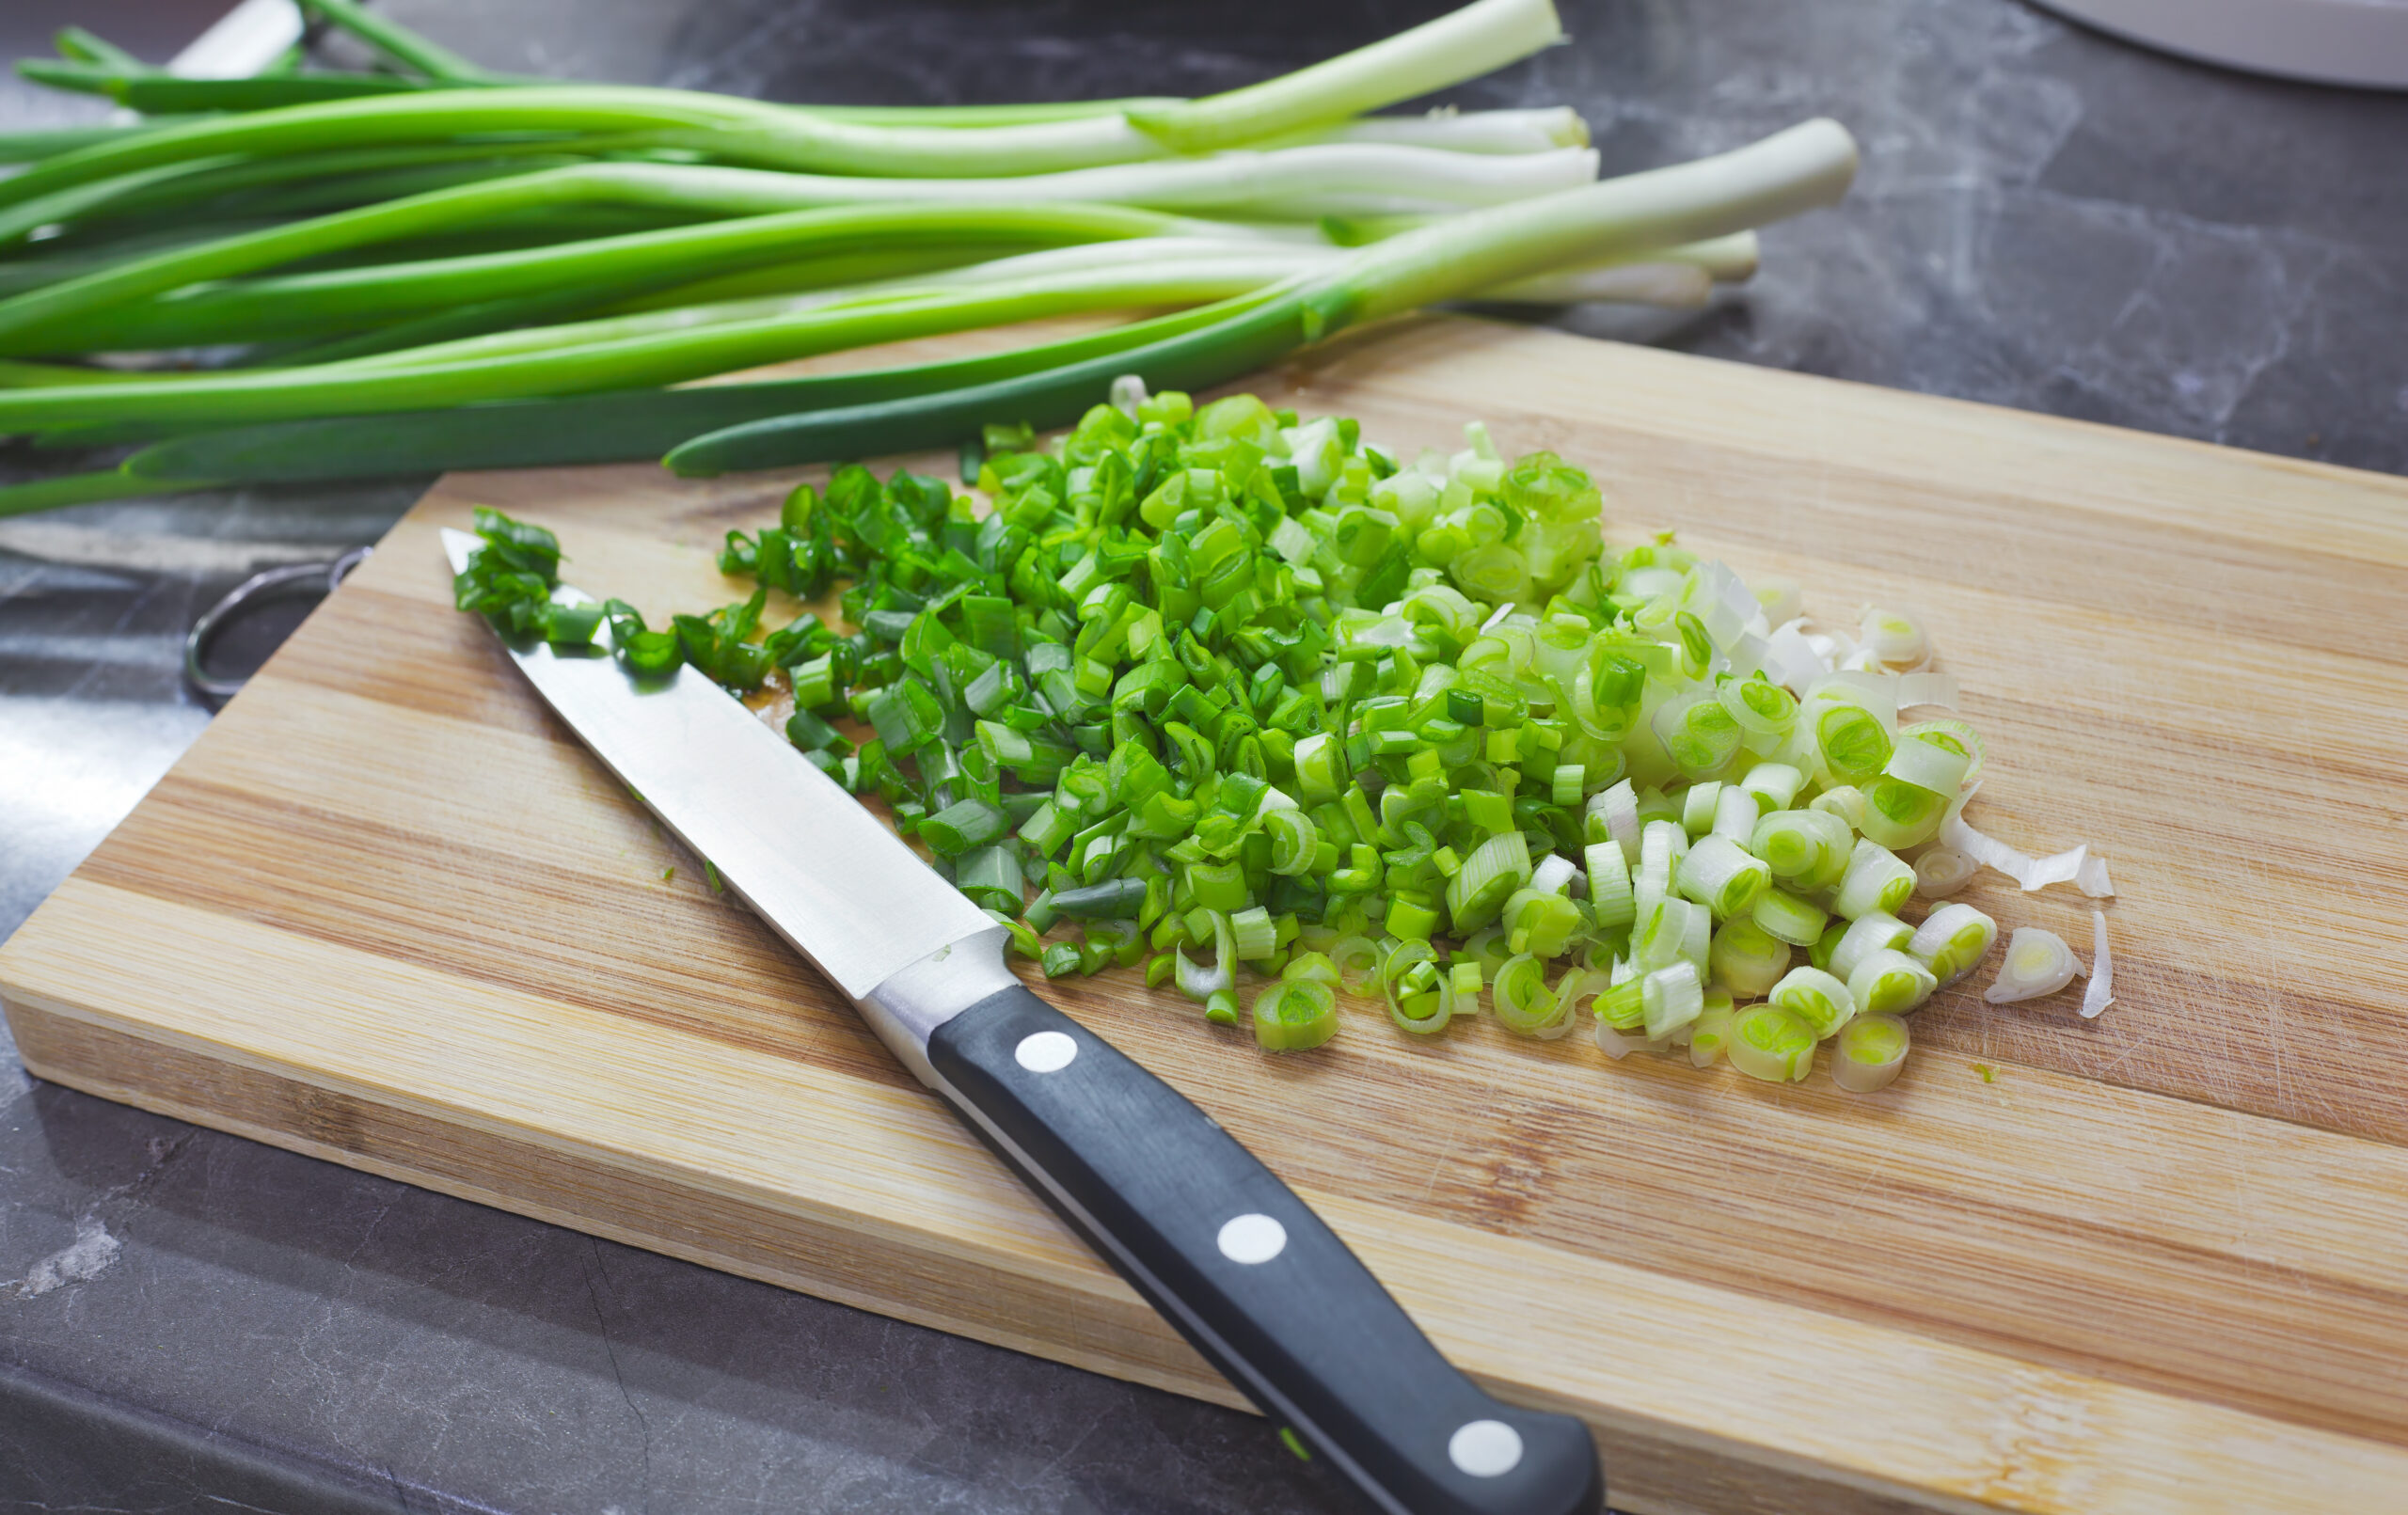 A “Leek” at the Nutrients of Green Onions